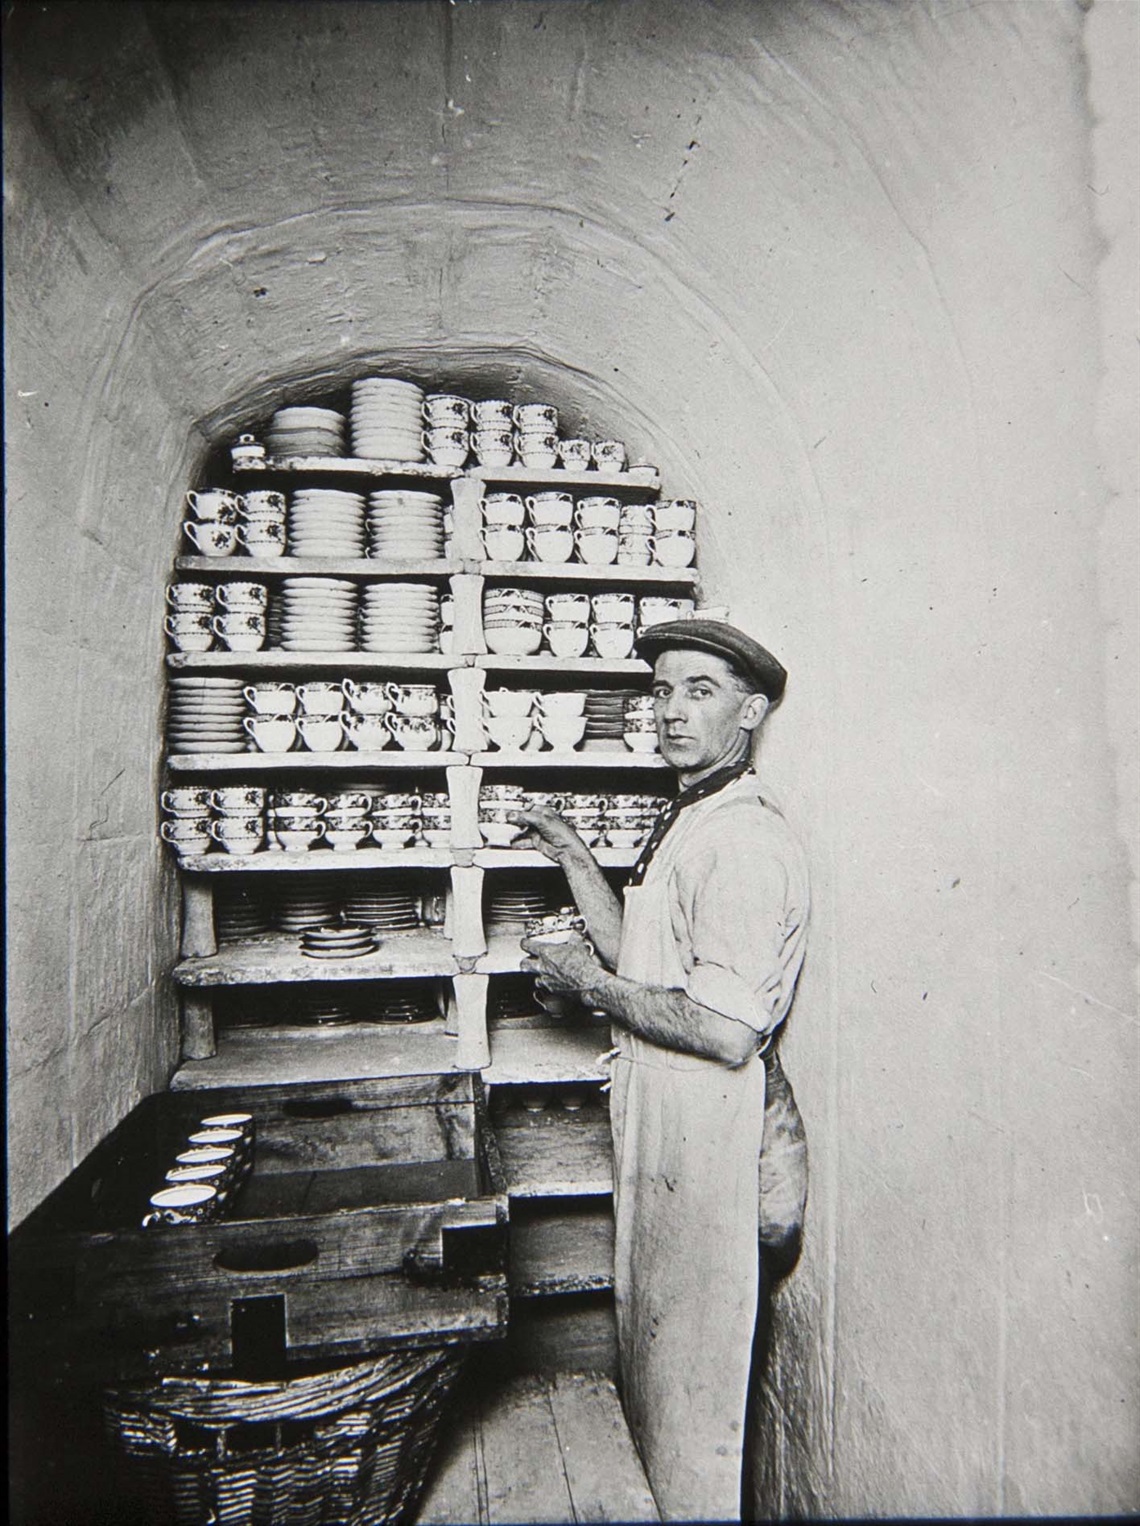 Image: Pottery factory worker, unidentified, collection of the Waitaki District Archive, 2015/441.1278